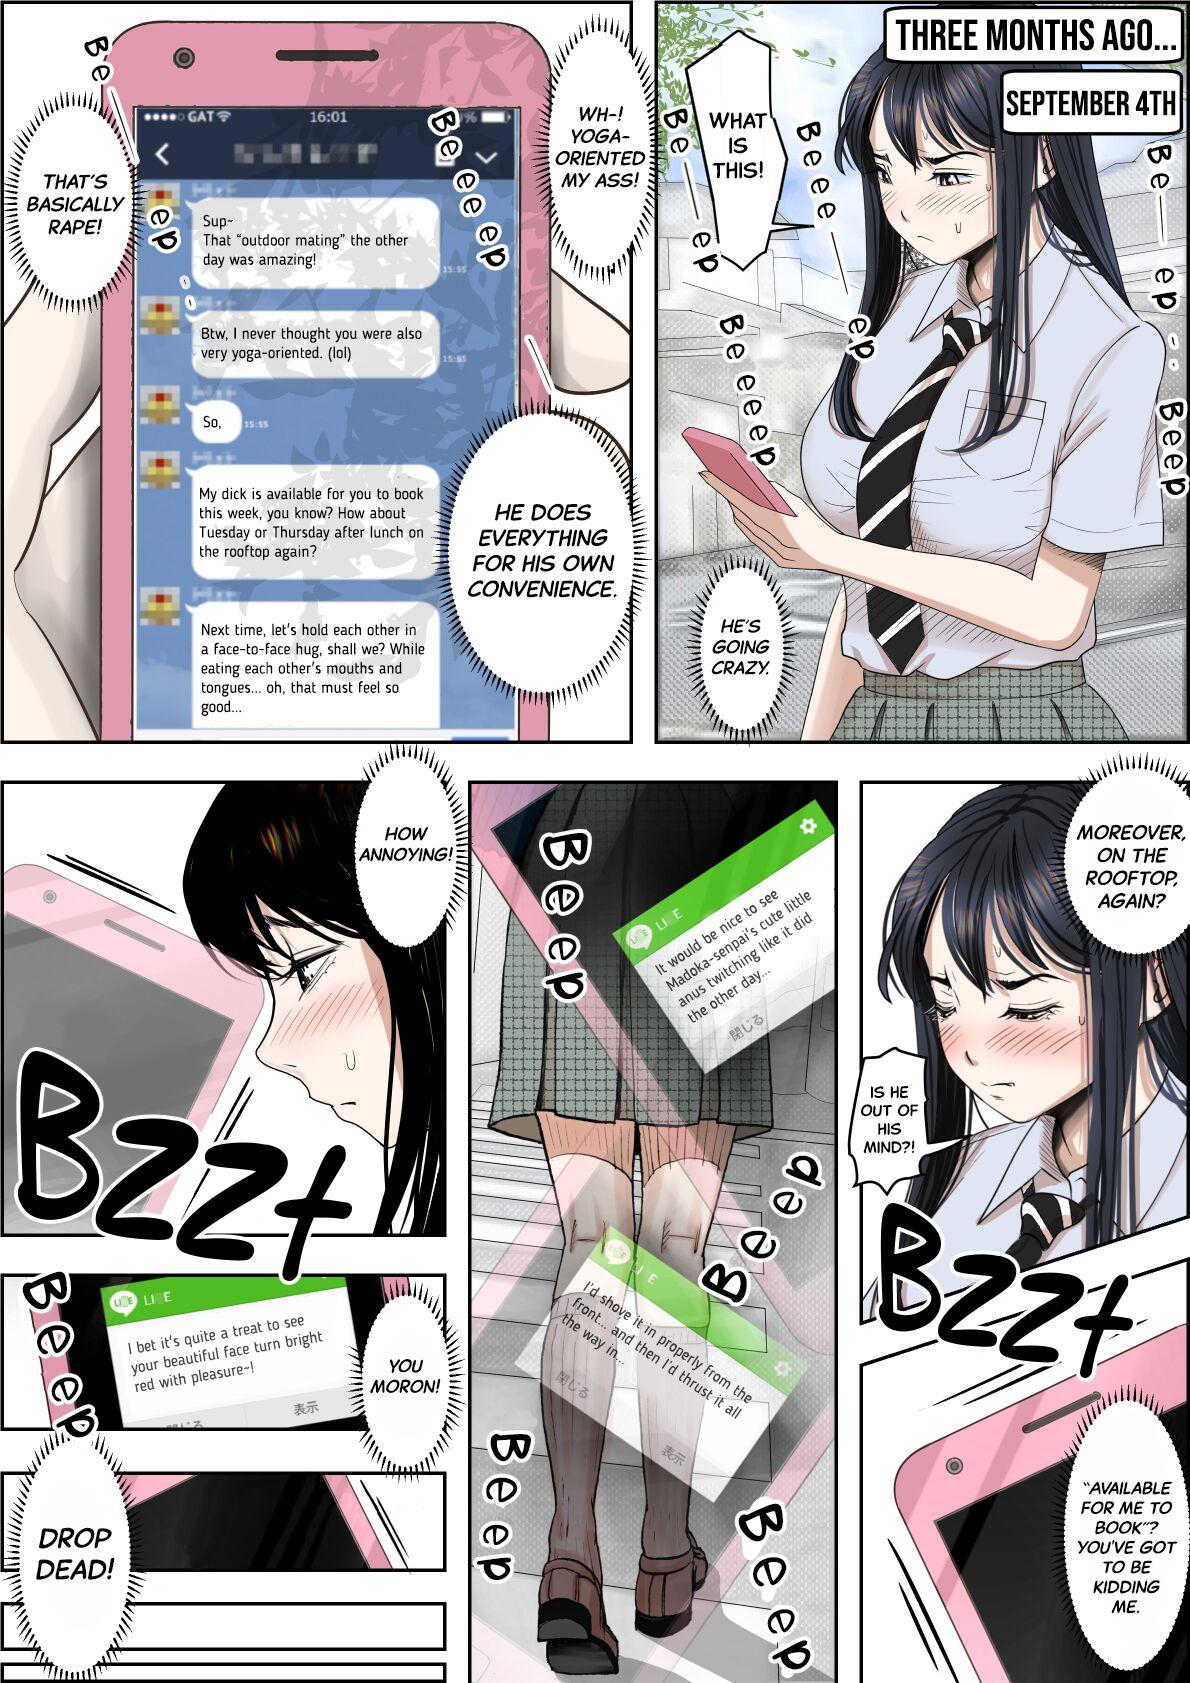 Fun Charao ni Netorare Route 2 Vol.4 | Cuckolded by a playboy Route 2 Vol.4 Gay Kissing - Page 4